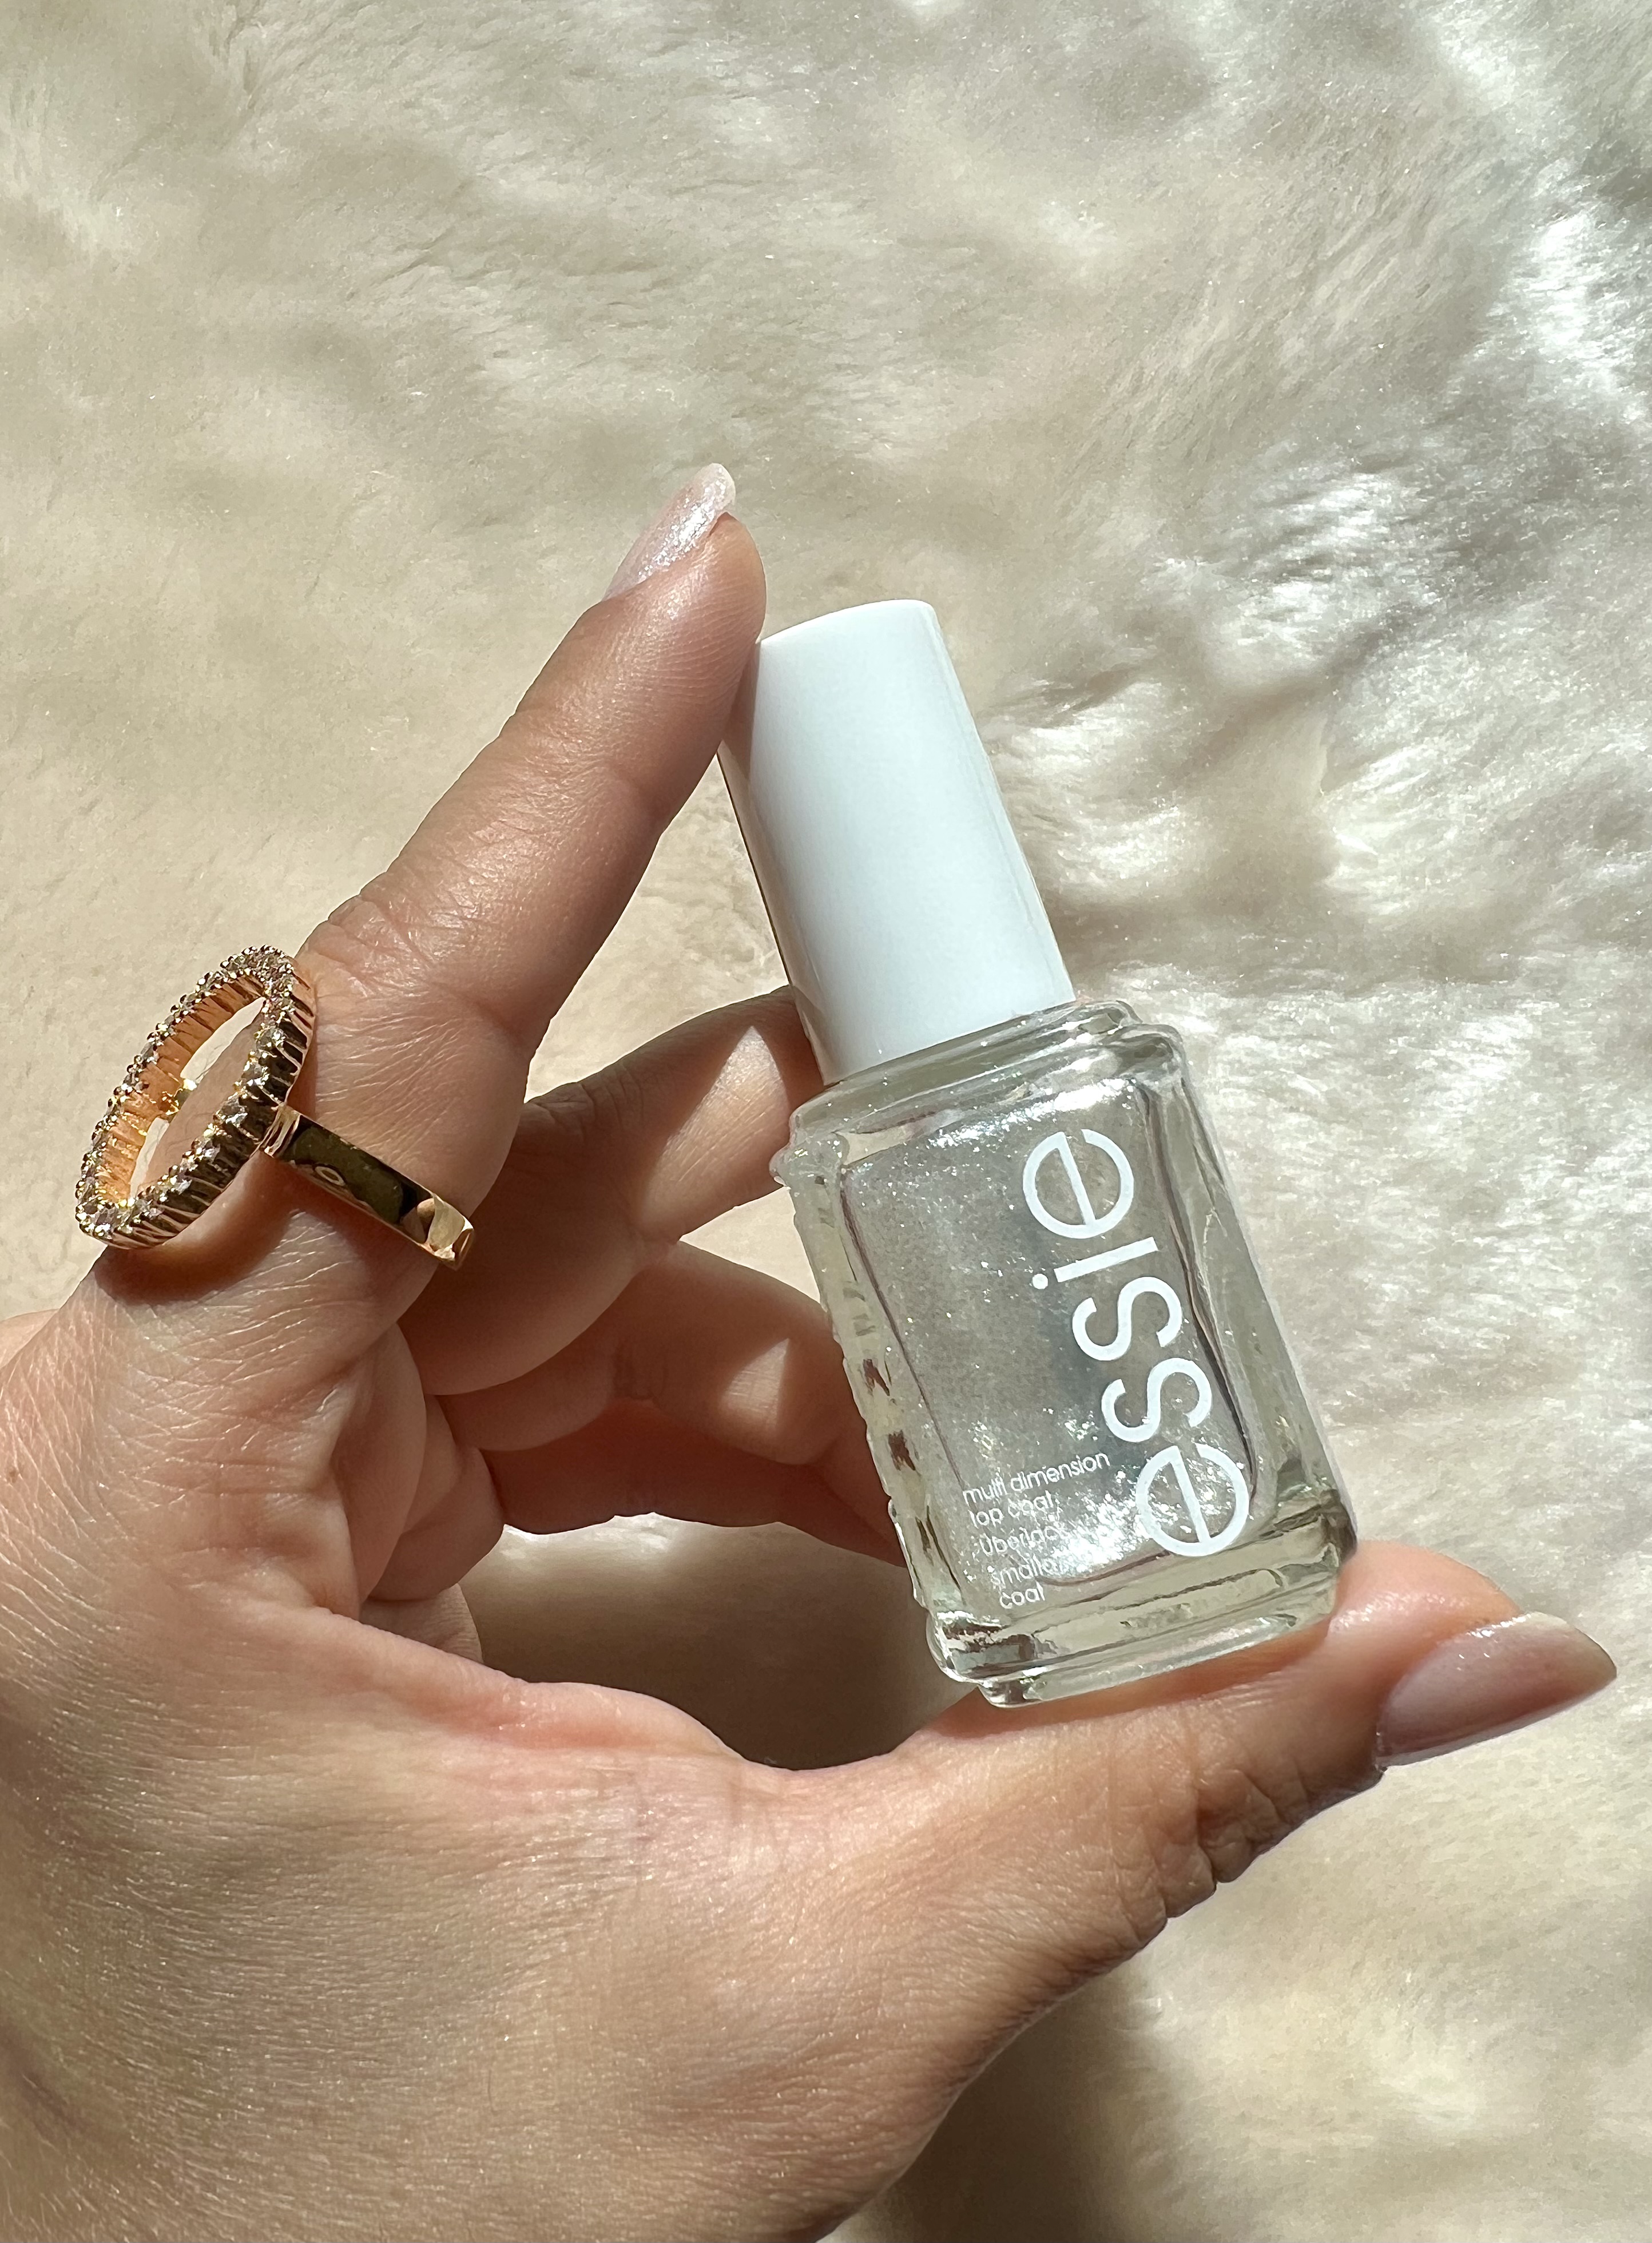 Luxeffects 278 in Stones Lacquer Nail Essie Set